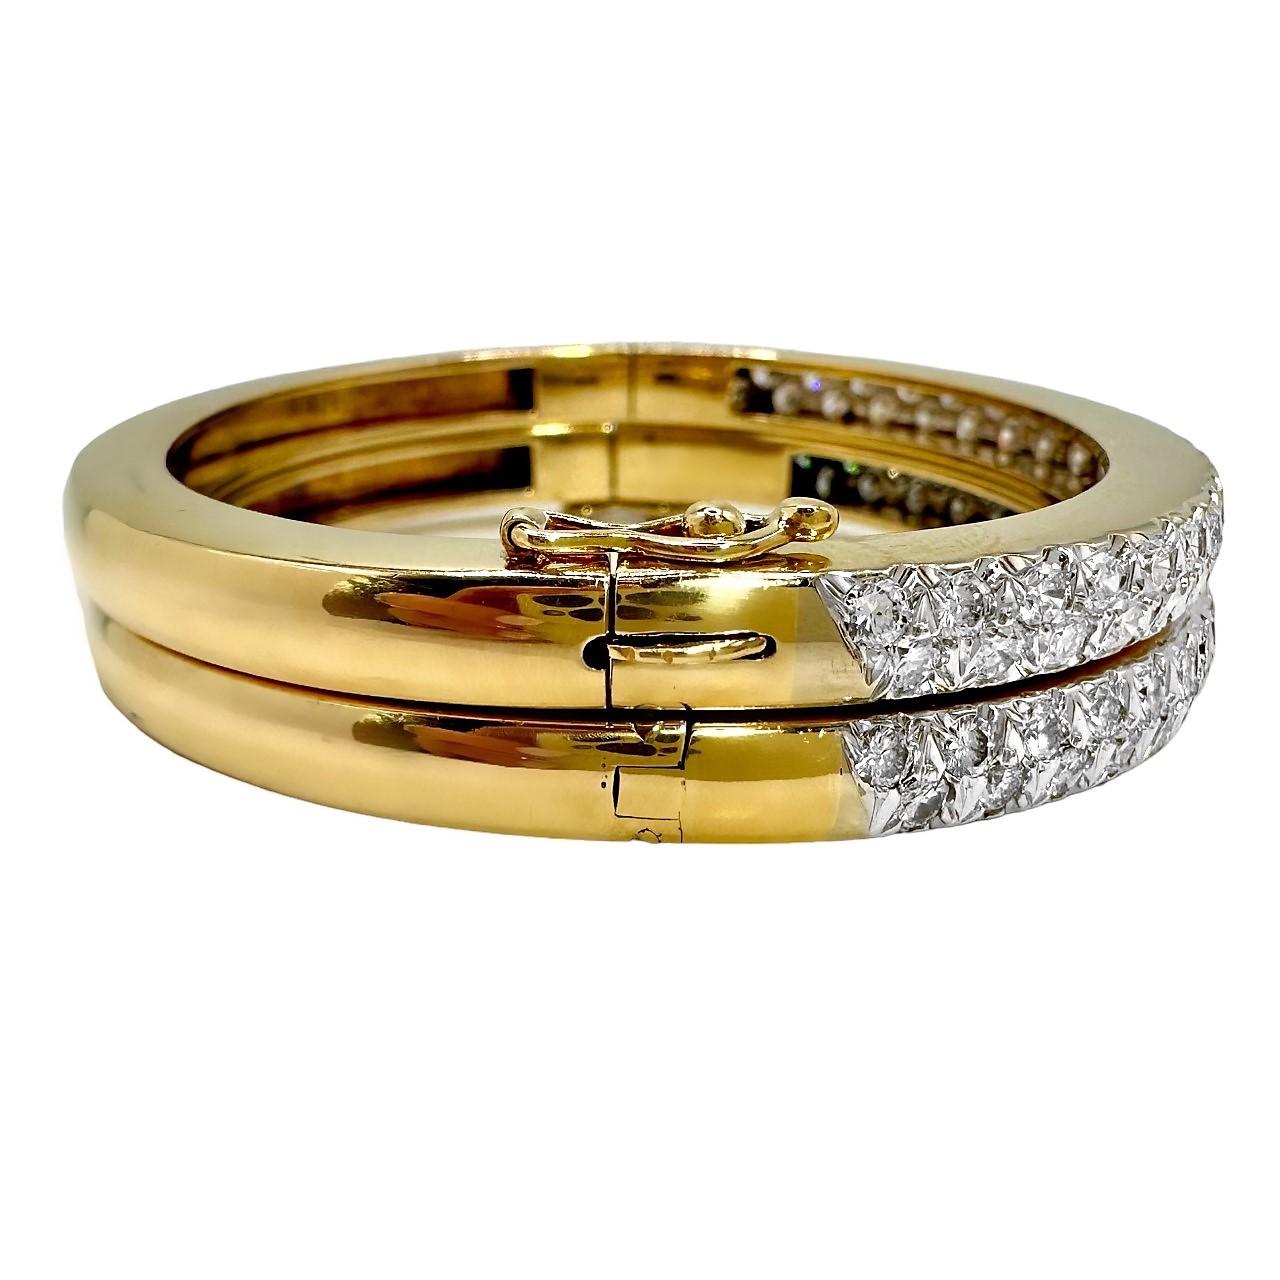 Pair of 14k Yellow Gold Oval Bangles with Pave Diamonds on across the Top For Sale 1